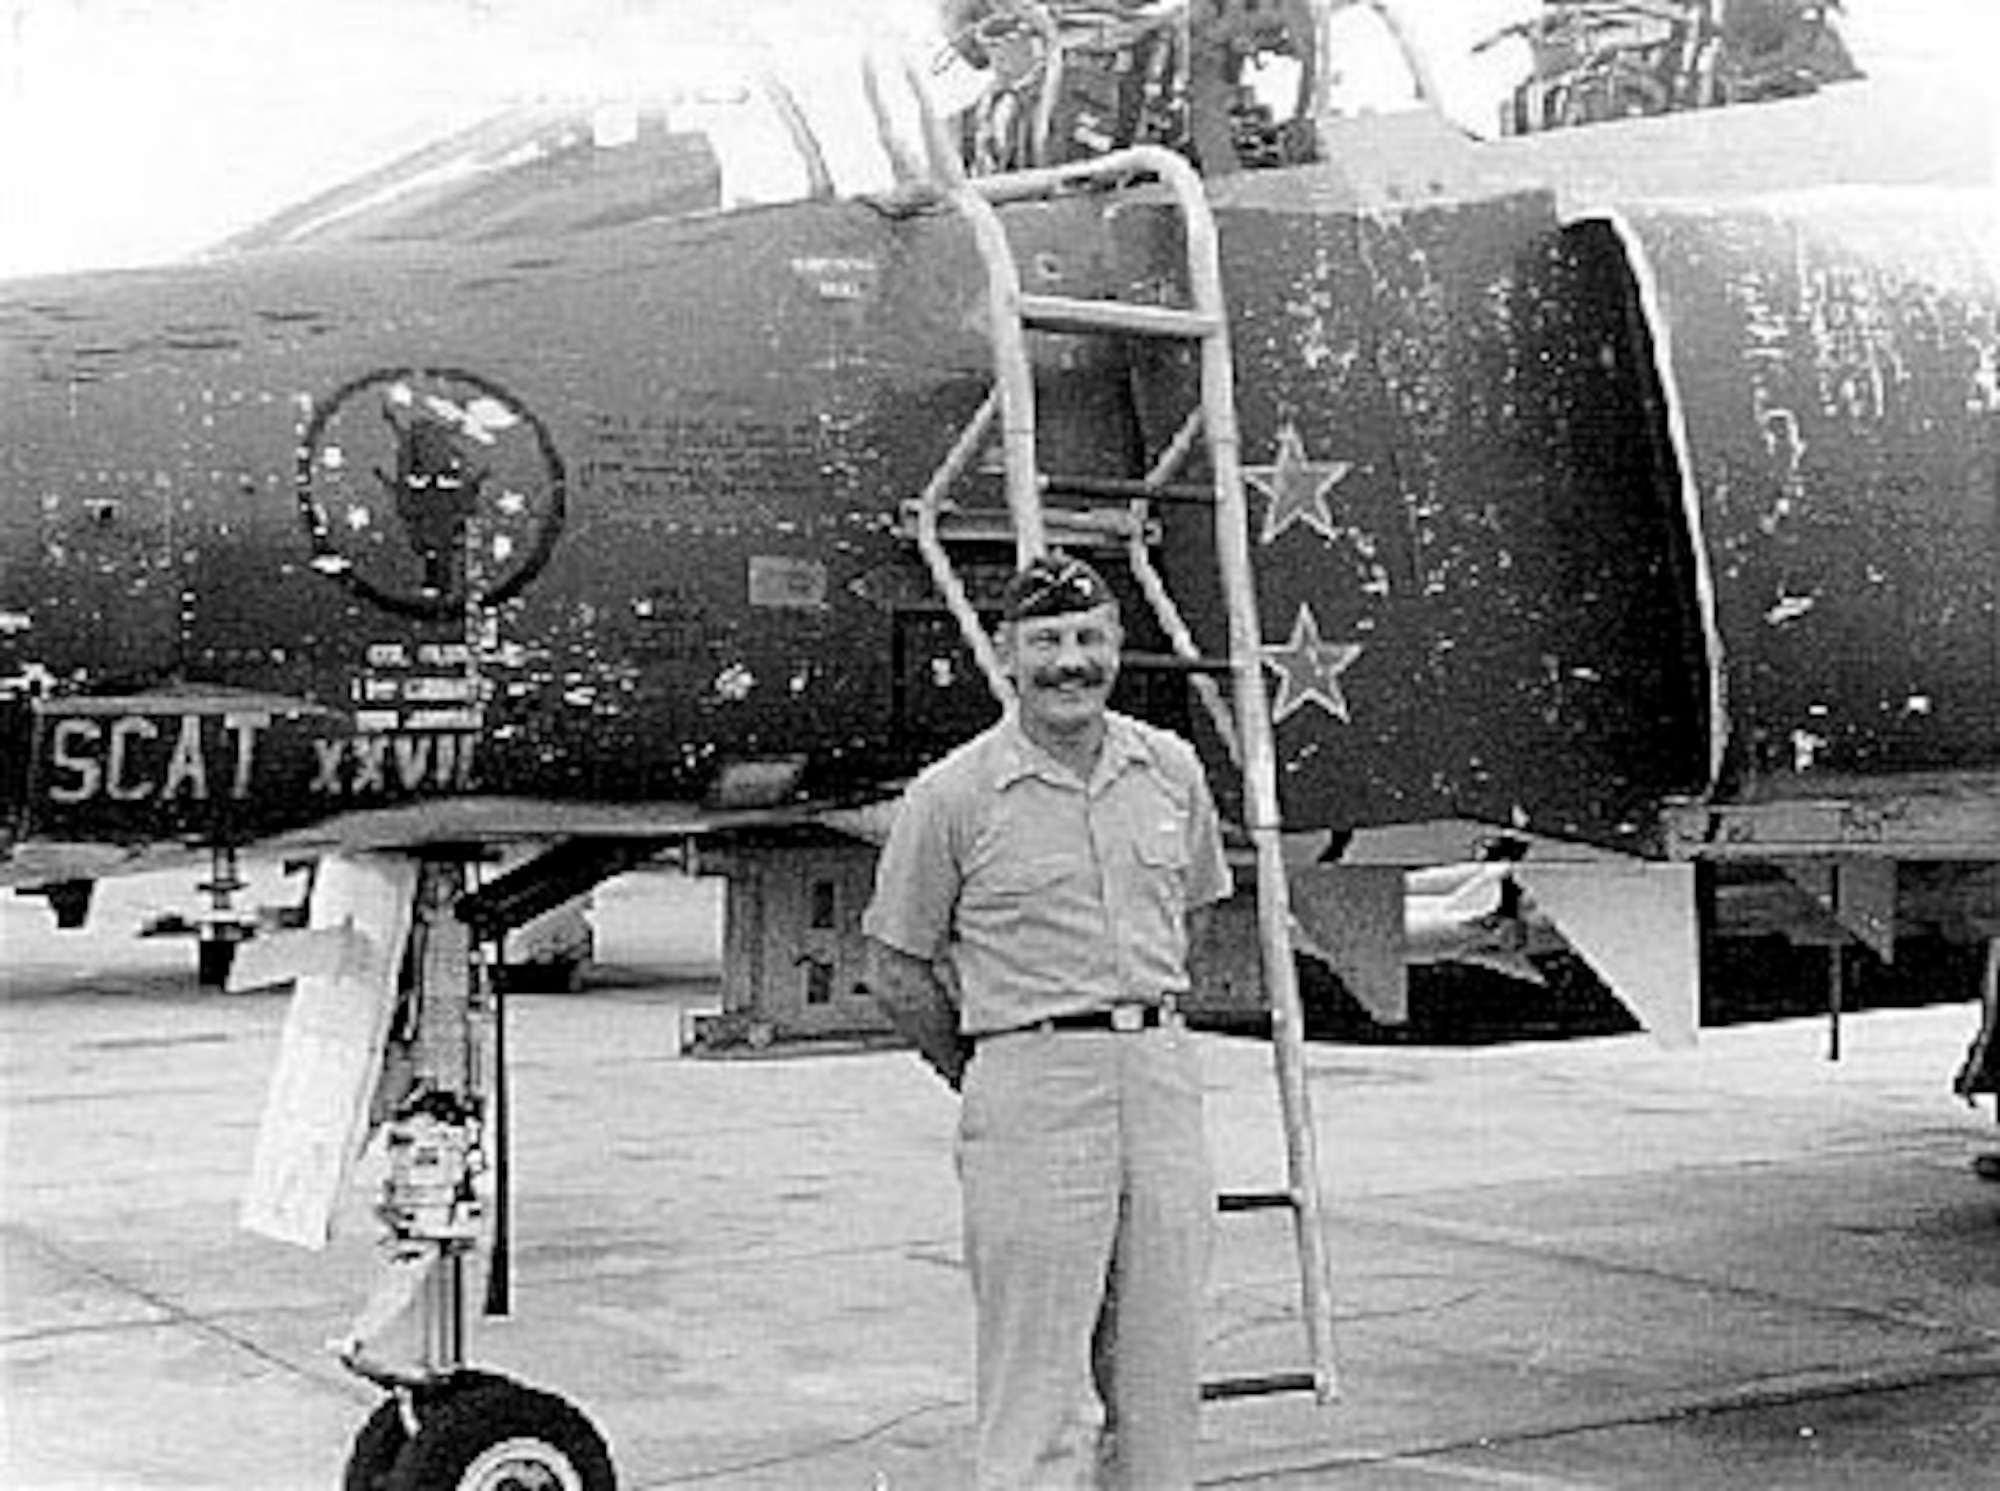 Col. Robin Olds with his F-4C Phantom, Scat XXVII.  He was the commander of the 8th Tactical Fighter Wing at Ubon Air Base, Thailand, and was credited with shooting down four enemy MiG aircraft in aerial combat over North Vietnam.  (U.S. Air Force photo)




(U.S. Air Force photo)